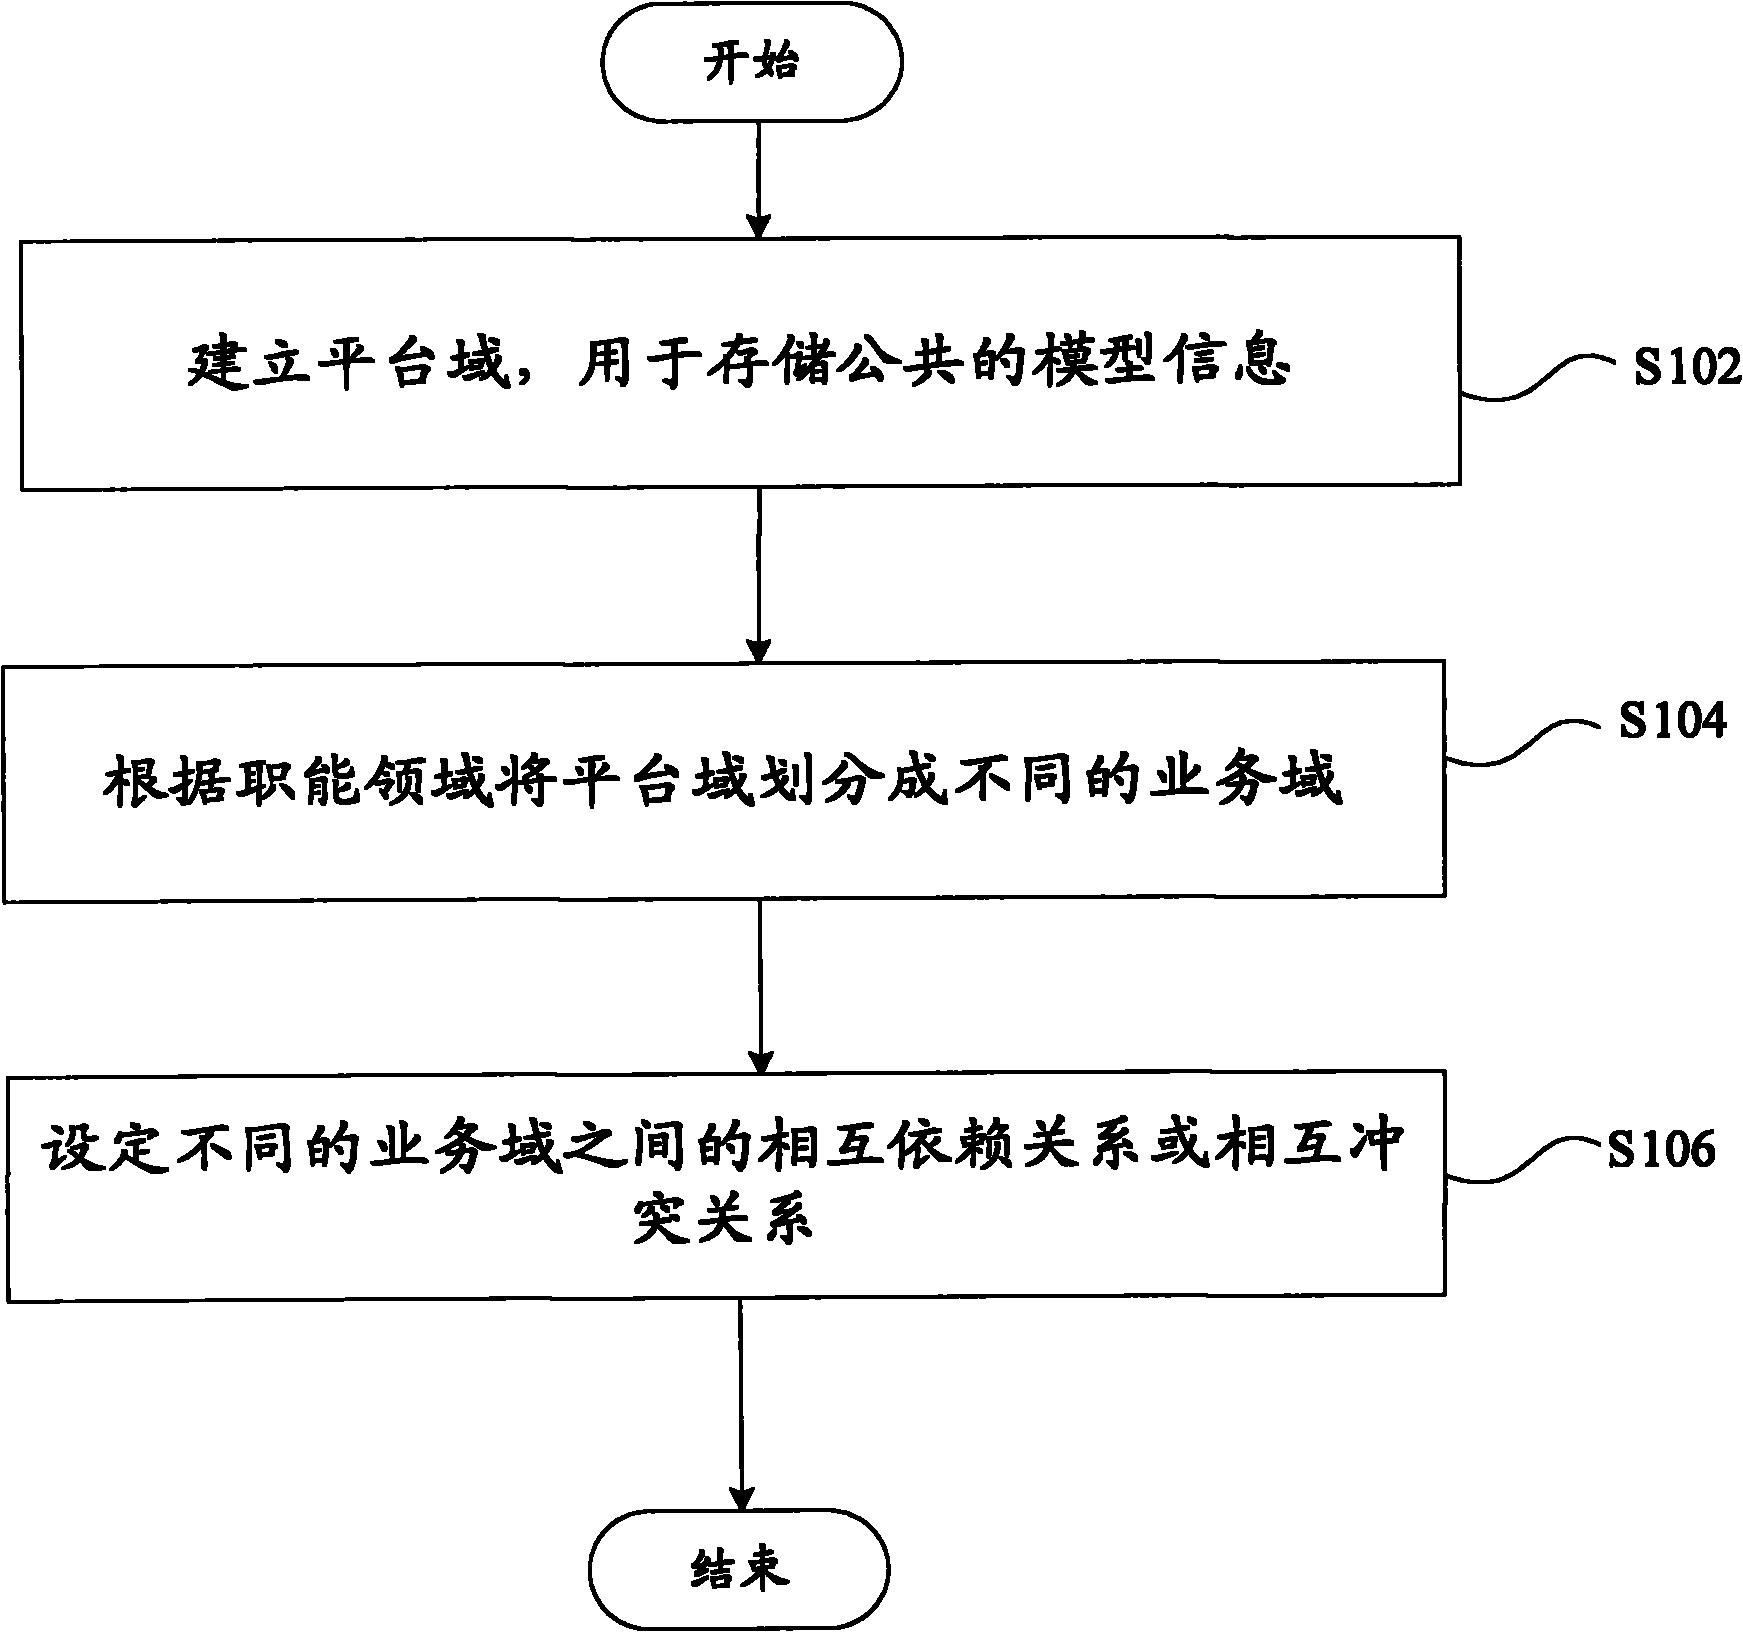 Data analysis method for product life cycle management system